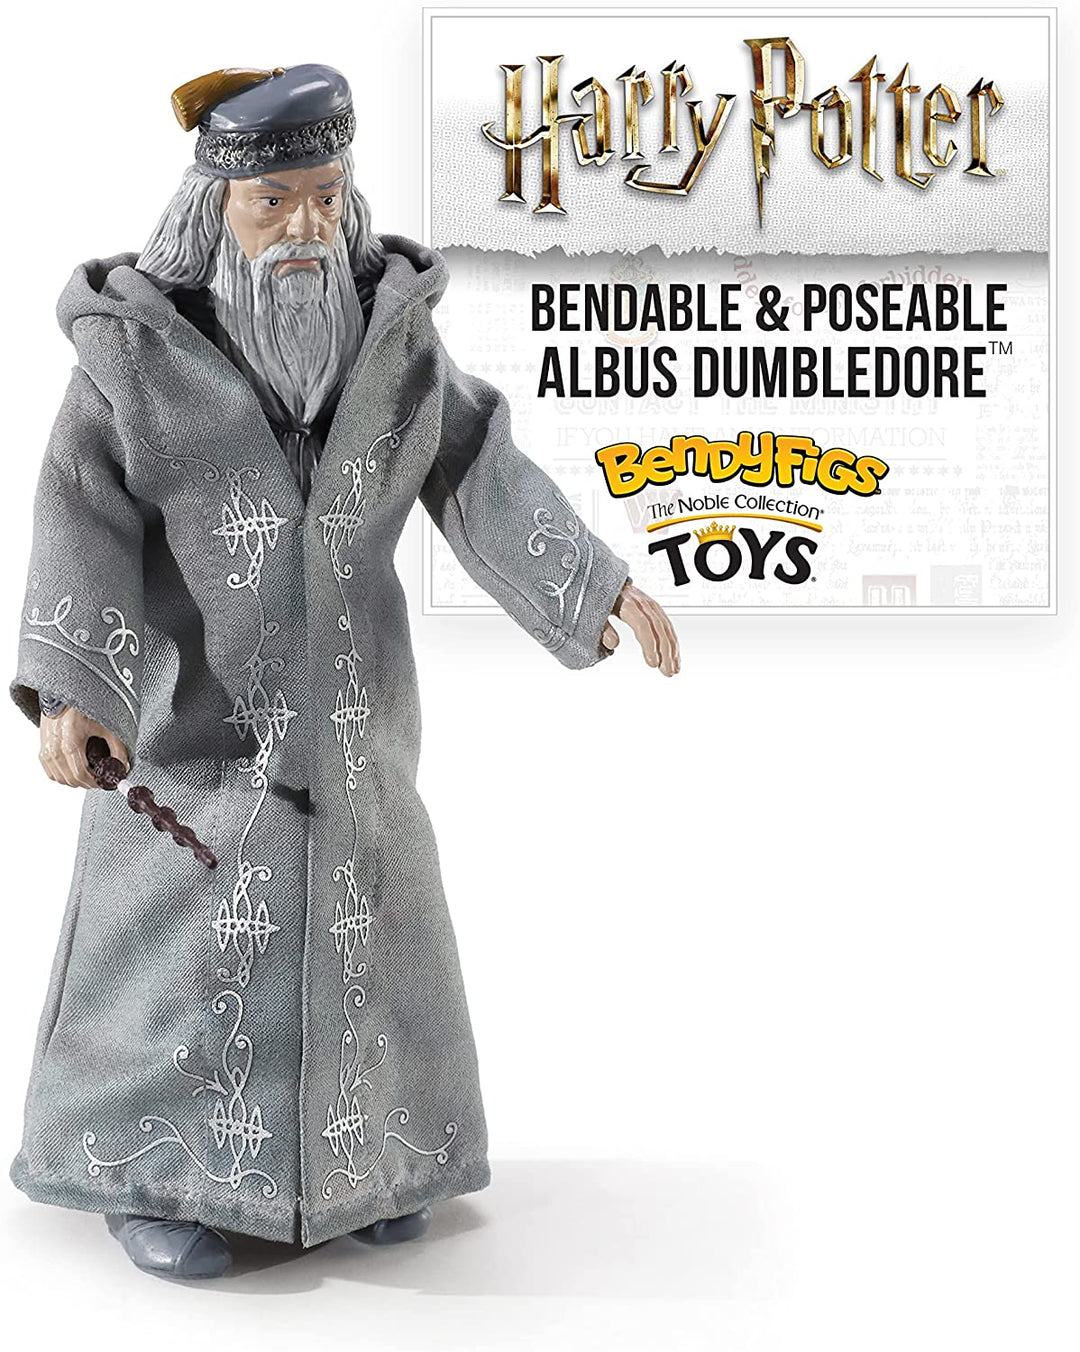 The Noble Collection Harry Potter Bendyfigs Albus Dumbledore - 7.5in (19cm) Noble Toys HP Bendable Figure Posable Collectible Doll Figures With Stand